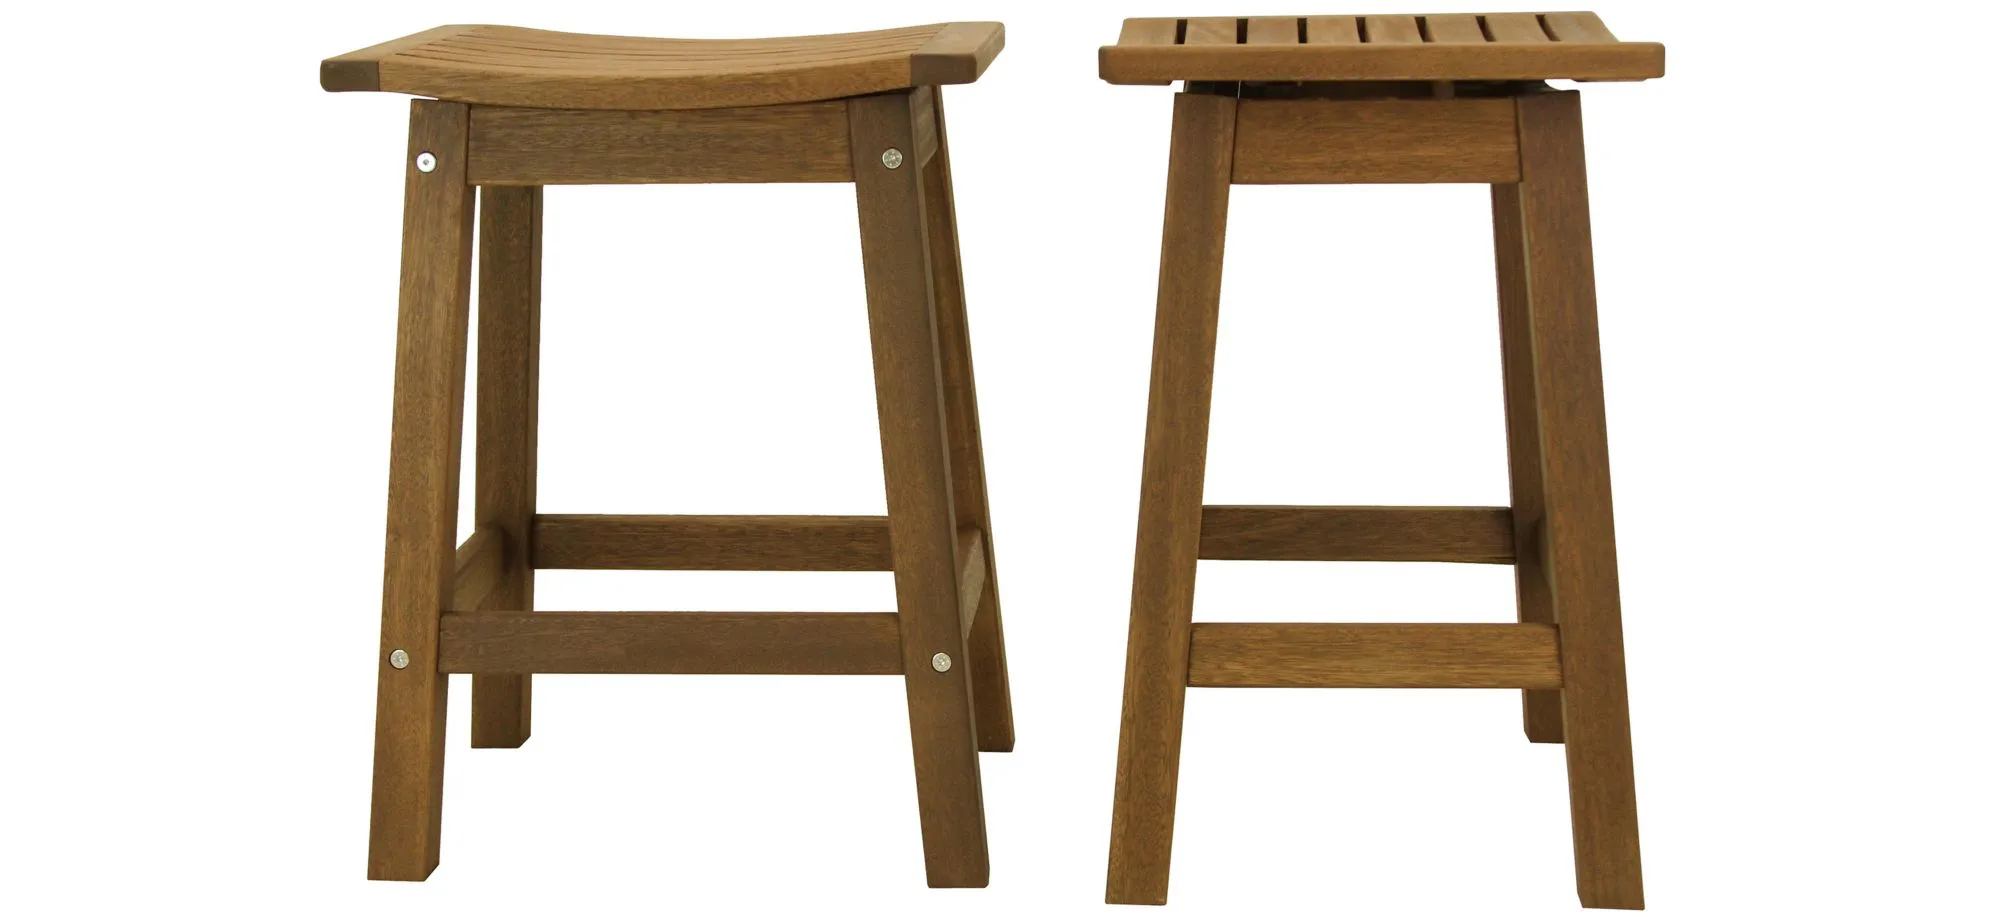 Biddle Outdoor Counter Height Stool - Set of 2 in Brushed White by Outdoor Interiors